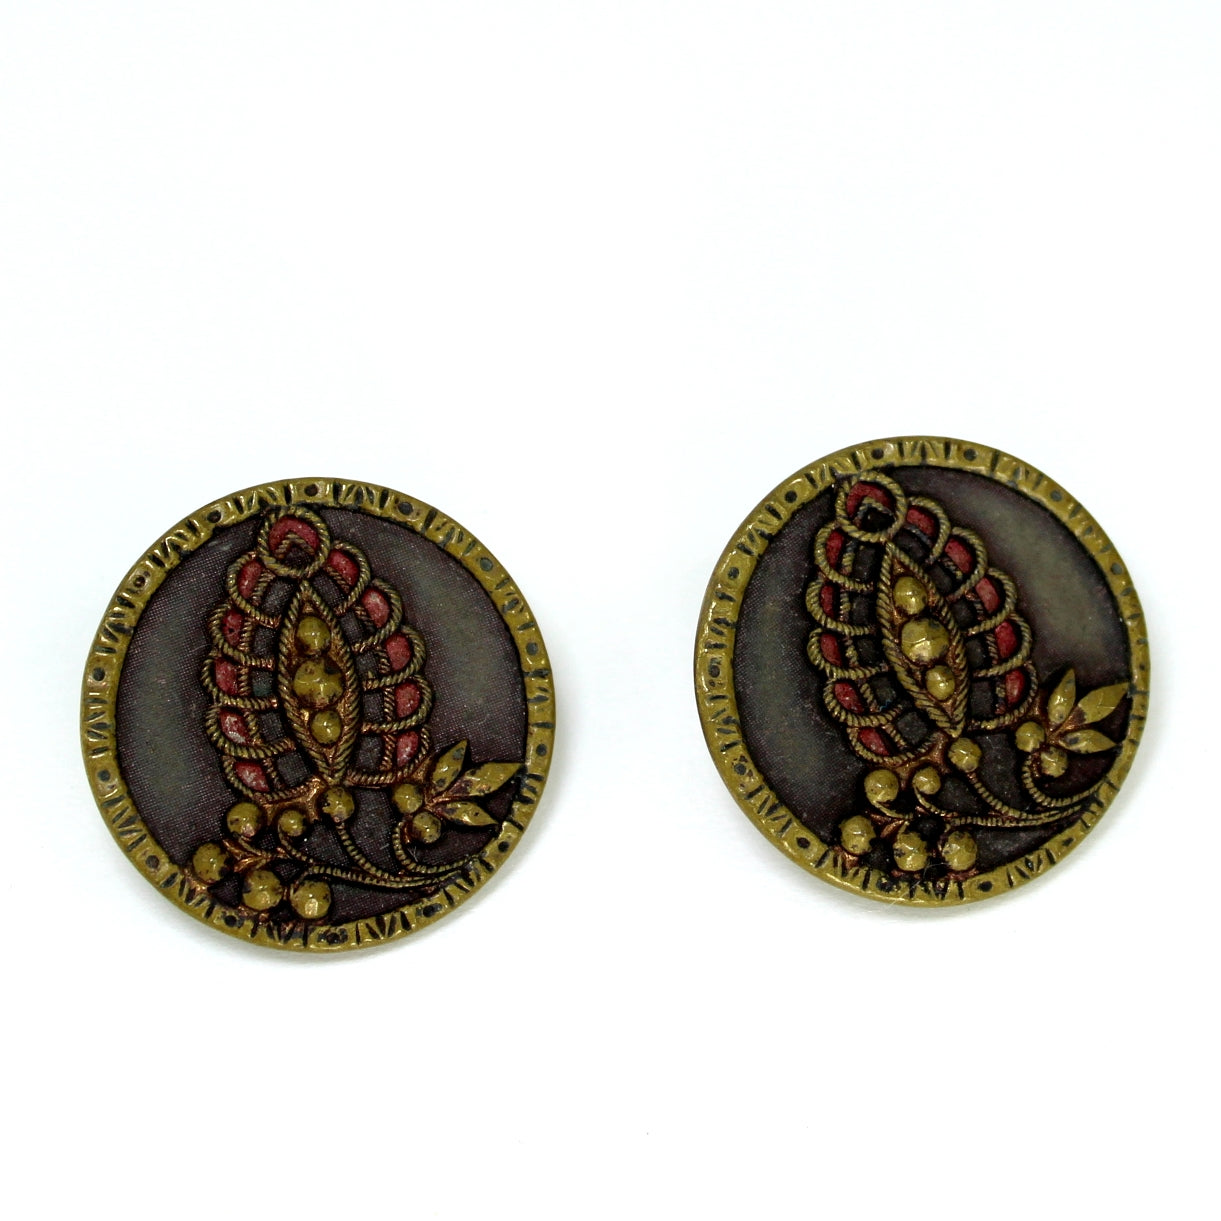 Antique Victorian Metal Buttons Earrings Post Stud Mixed Dimensional Metal brass copper leaves flowers